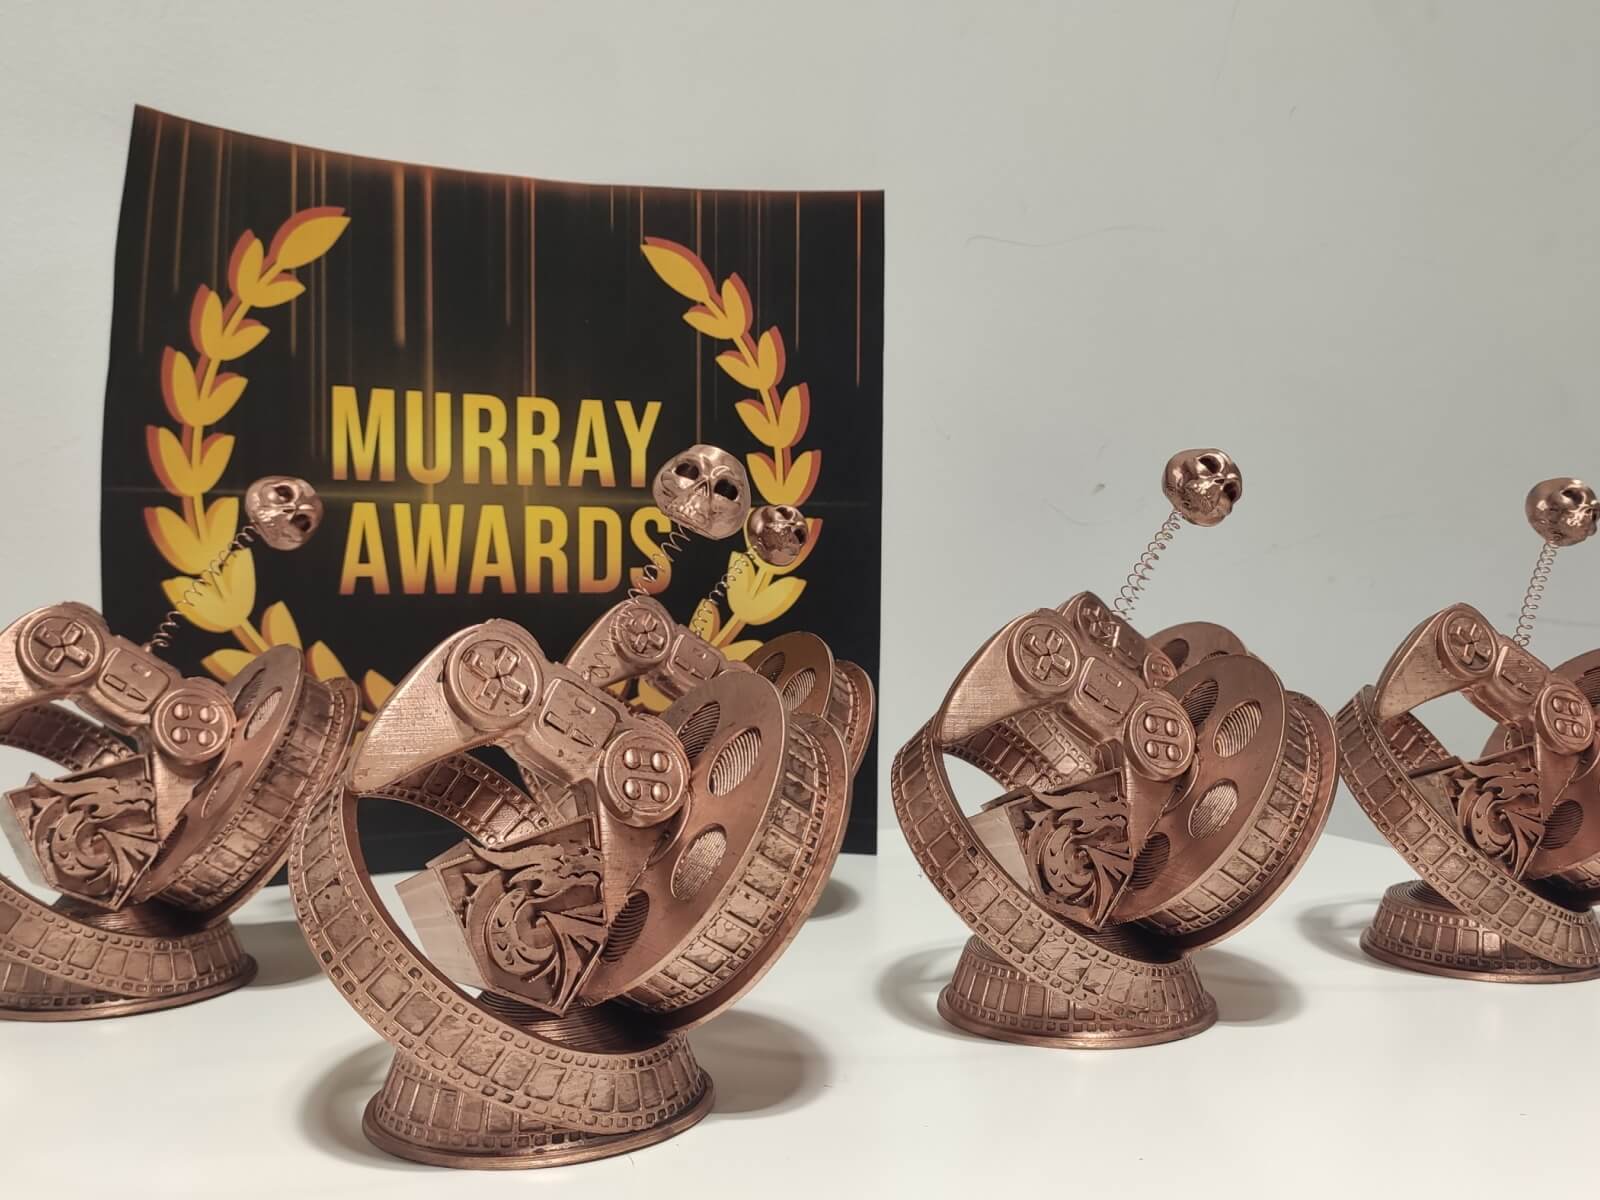 Five Murray Awards stand in front of the official Murray Awards logo